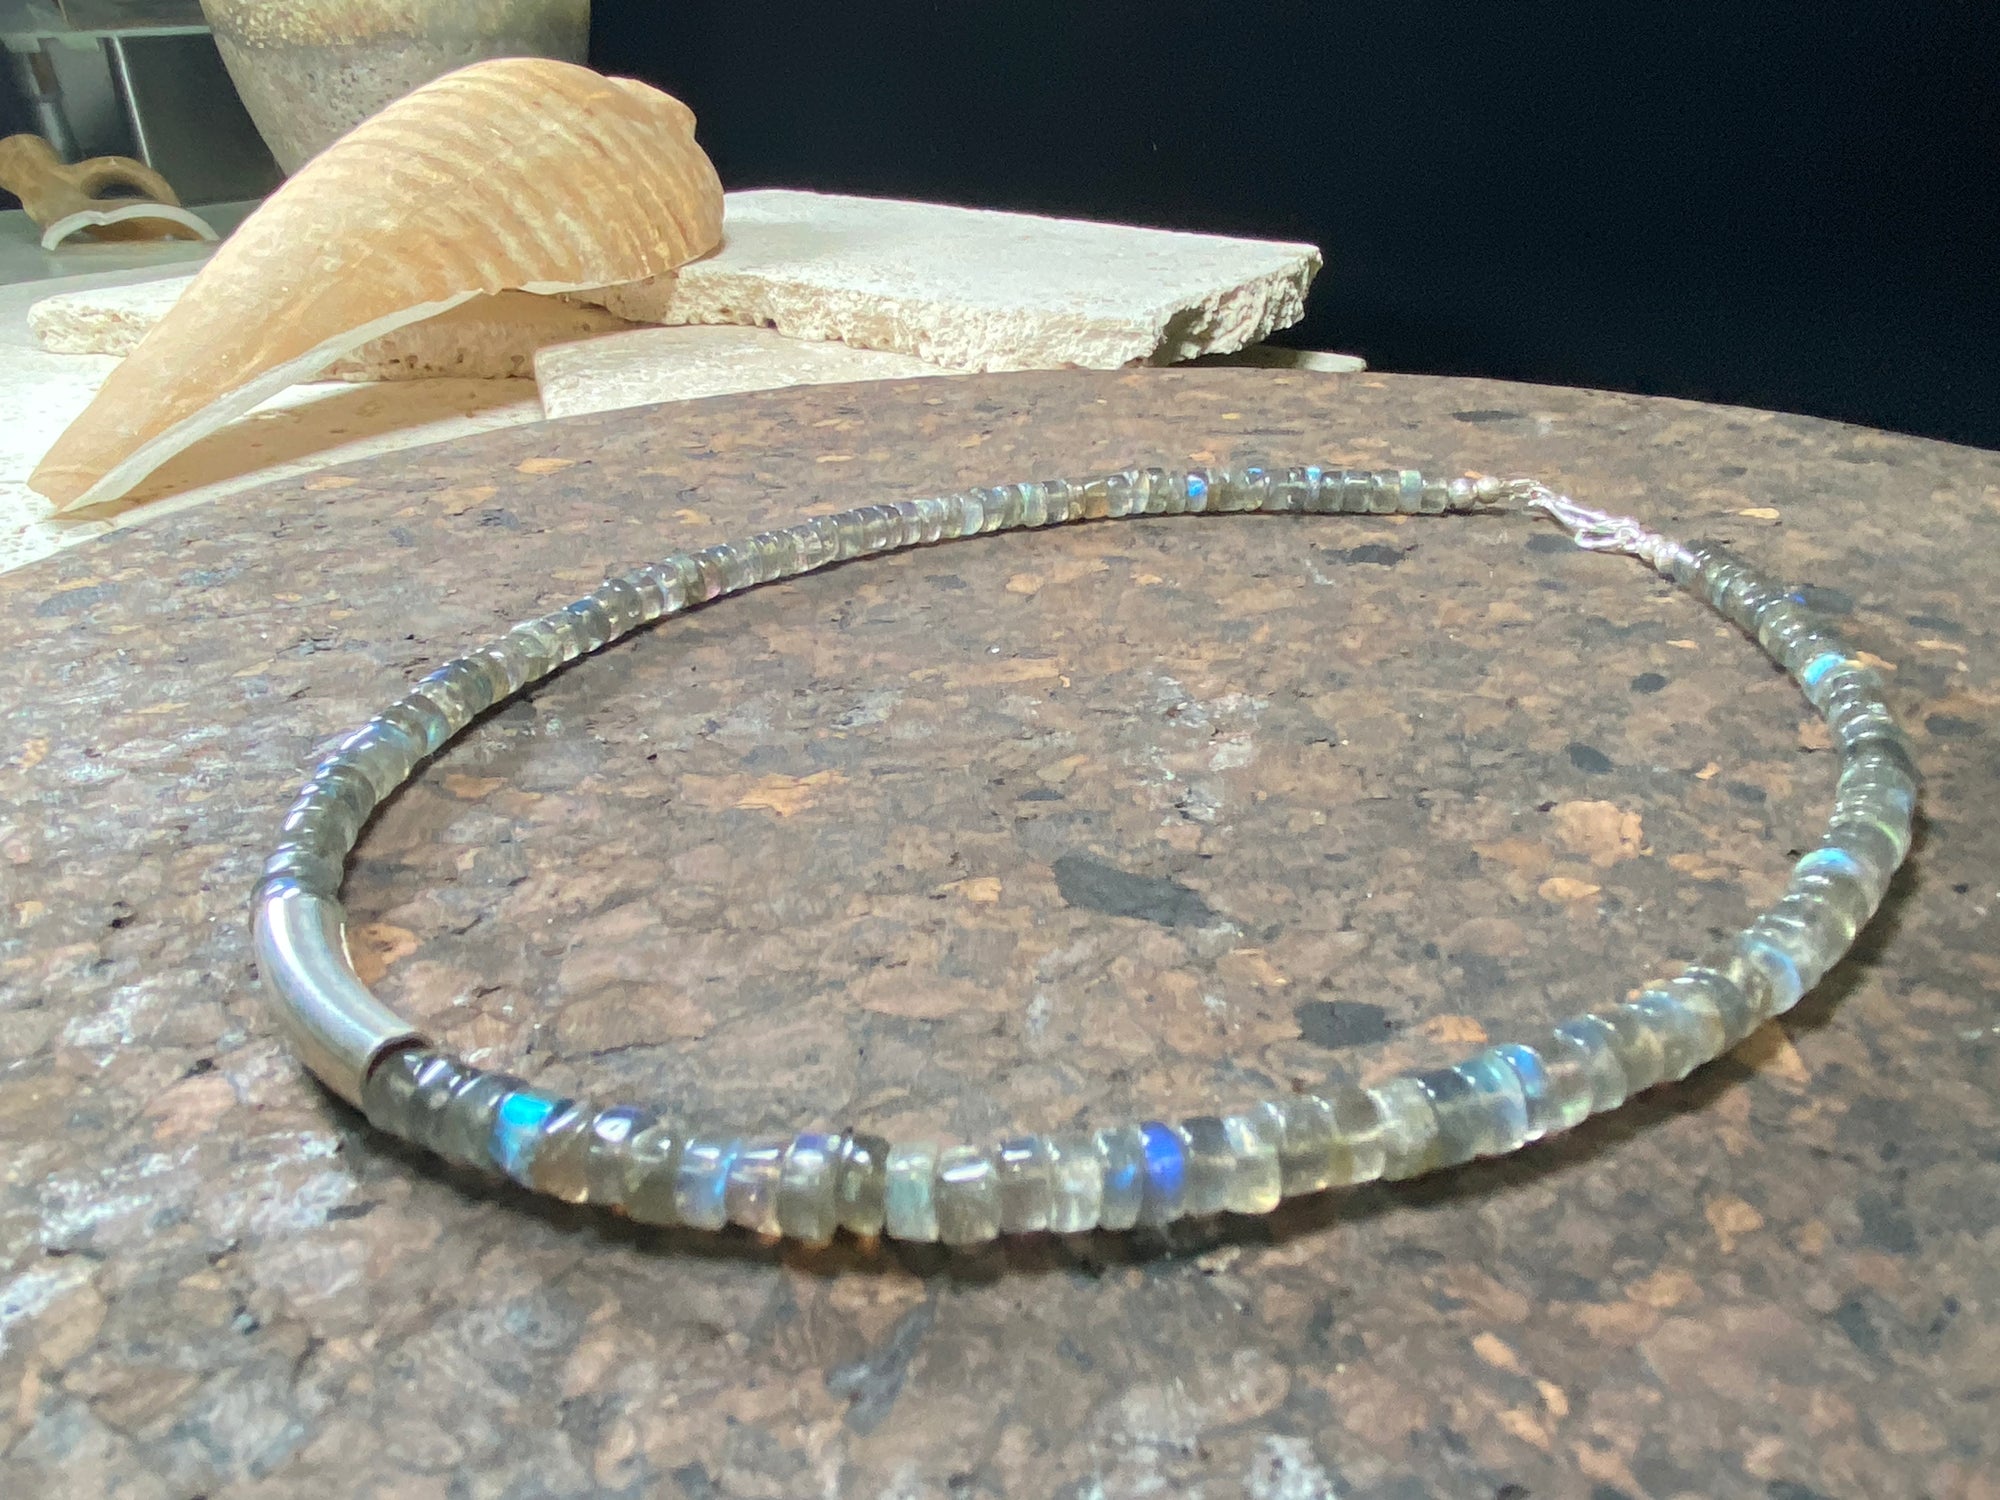 Striking choker necklace of rondel-cut labradorite, highlighted with a central sterling silver pendant bead. This necklace is finished with a sterling silver hook clasp. Length 42 cm